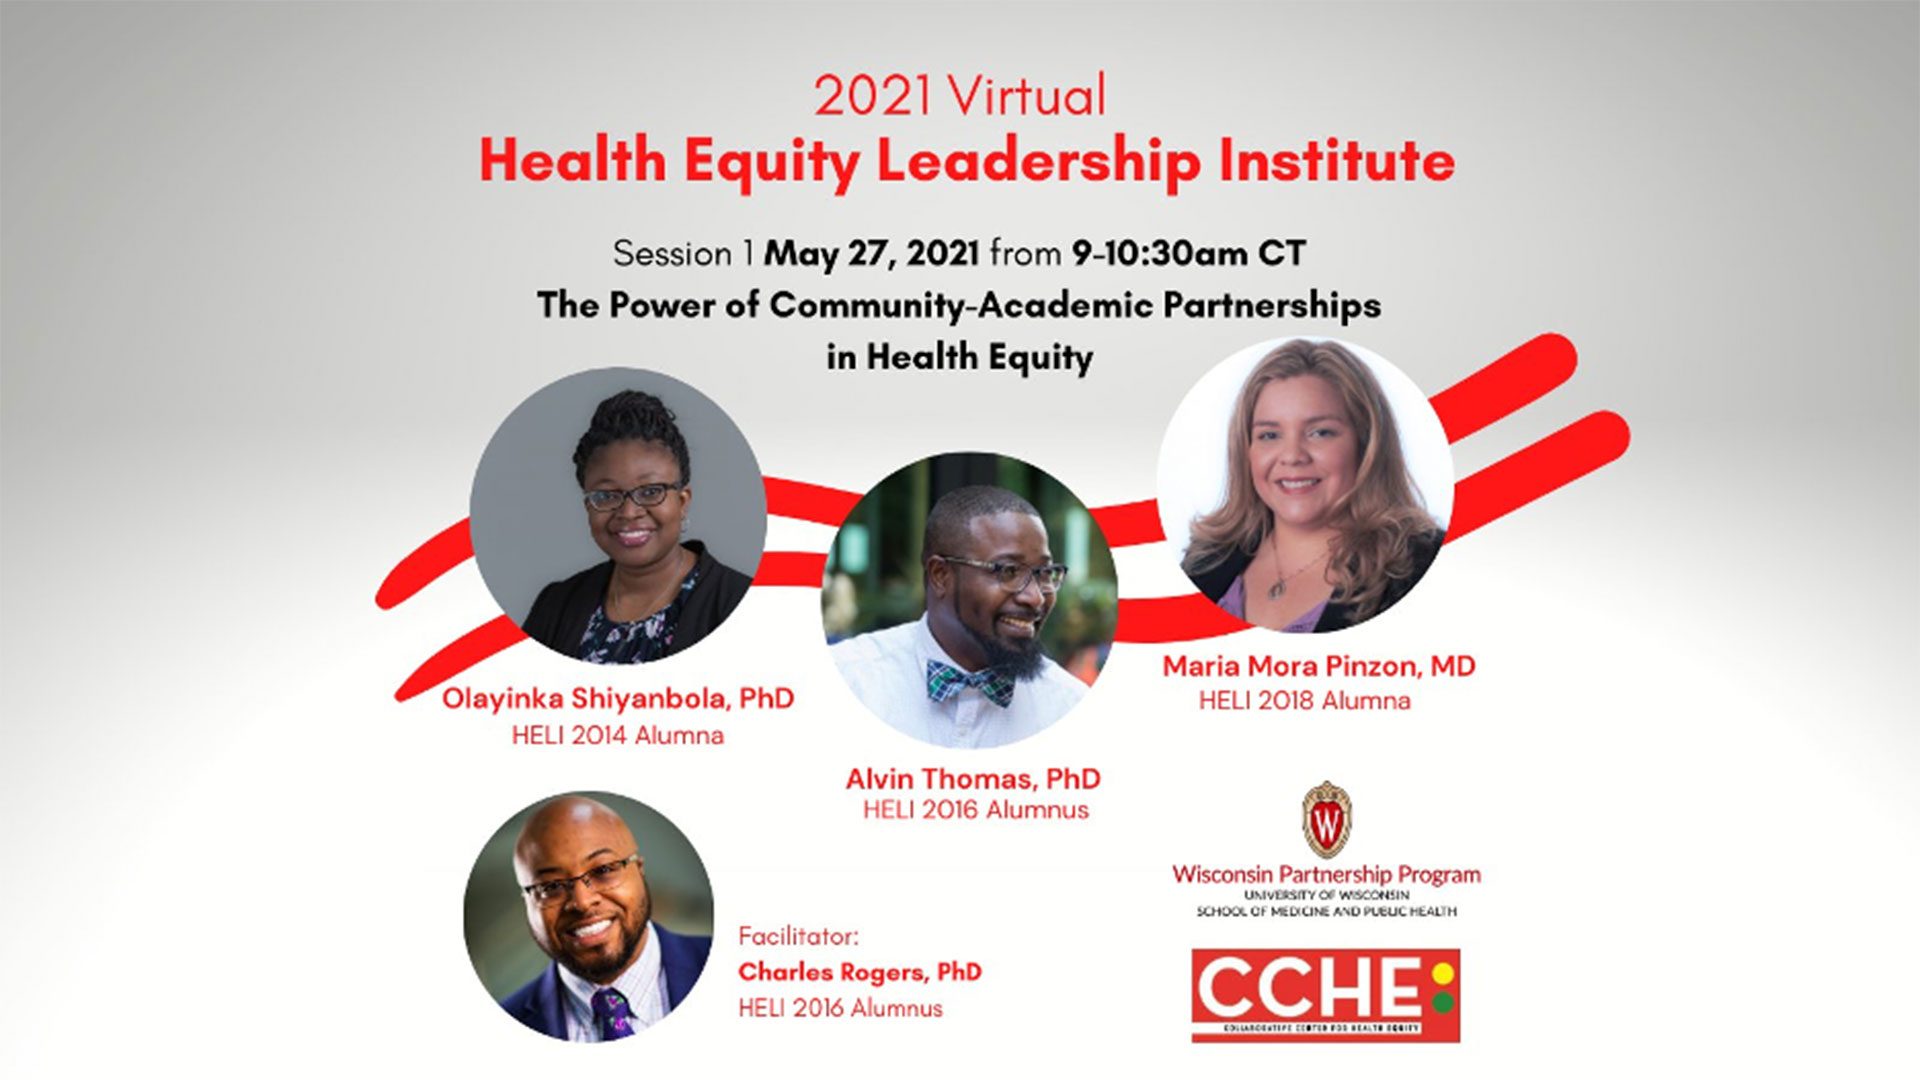 poster of 2021 Virtual Health Equity Leadership Institute